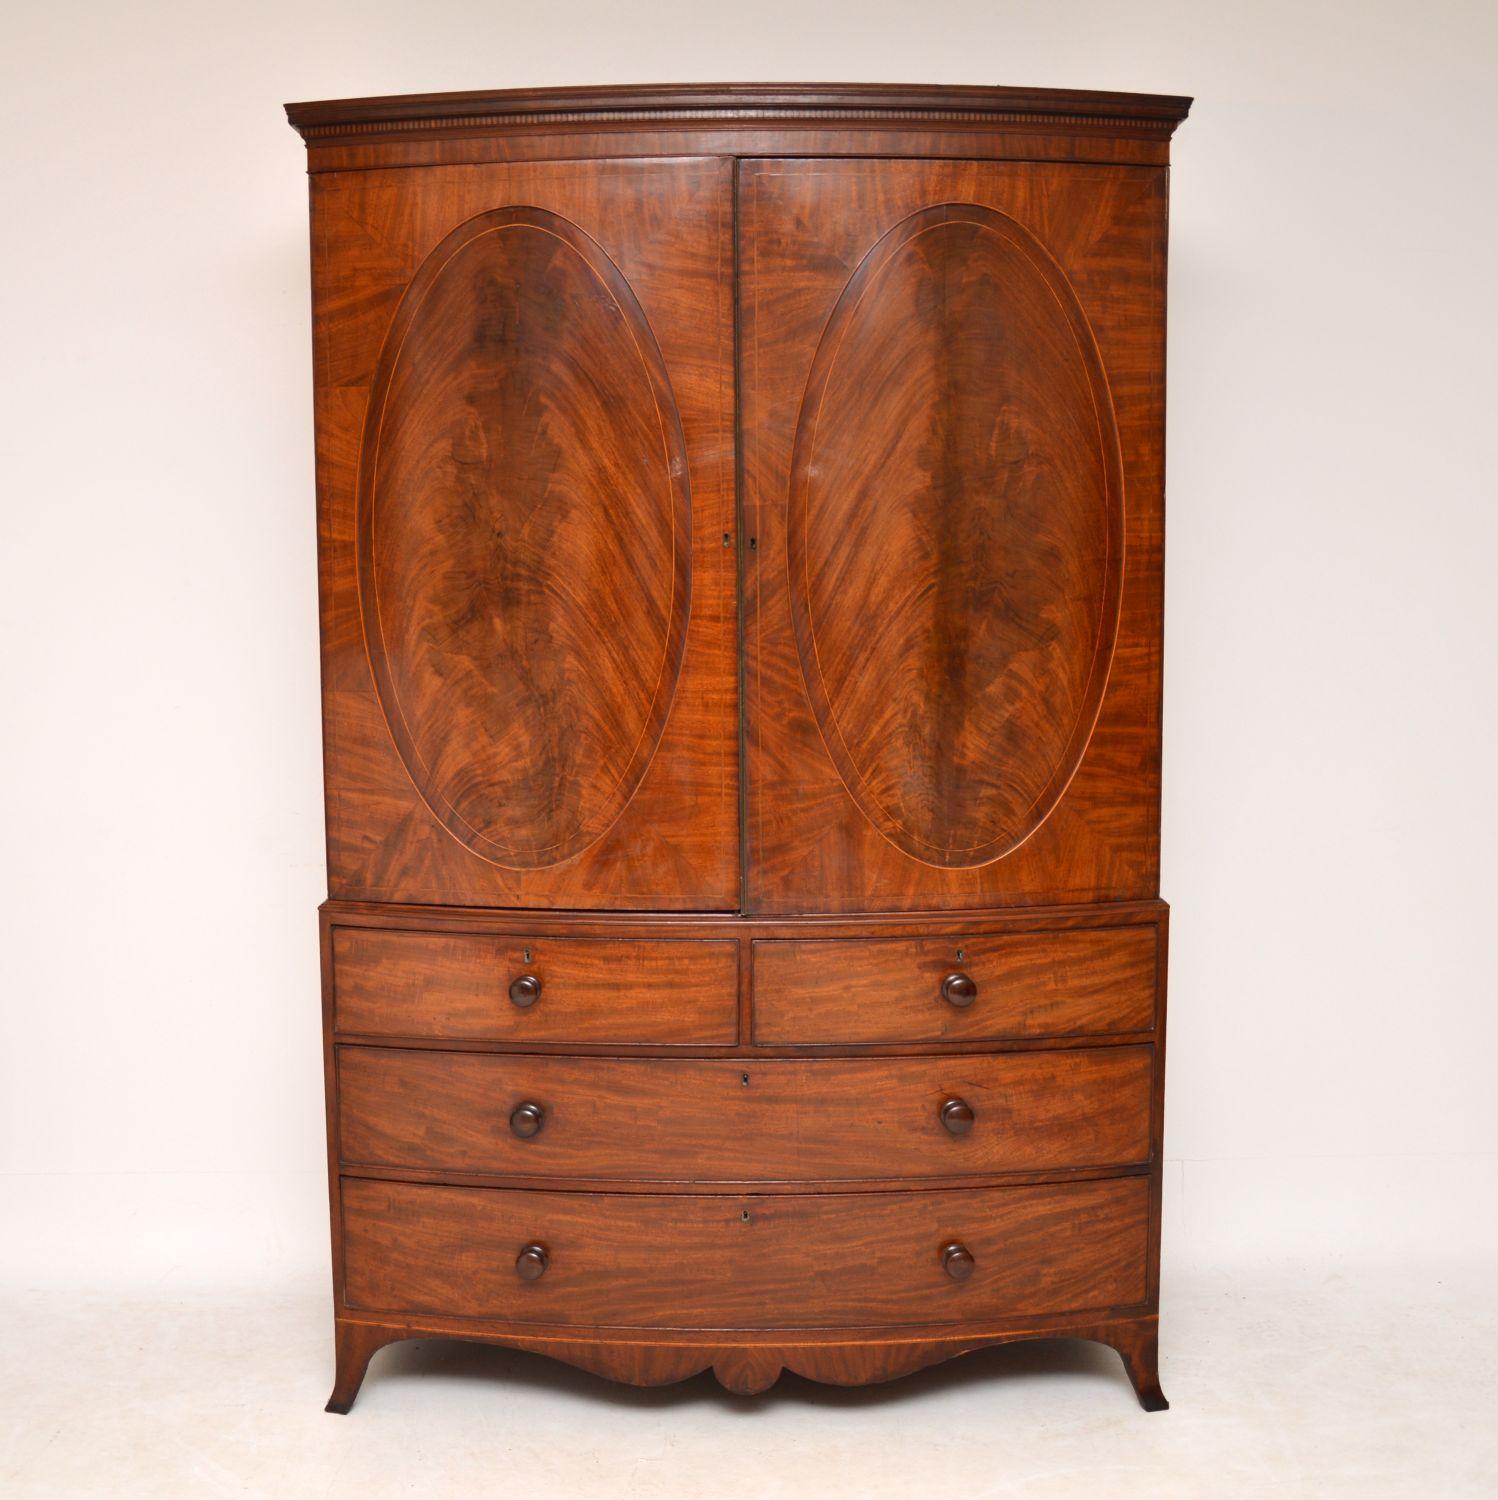 Very impressive antique George III mahogany linen press dating from circa 1800 period and in very good condition. It’s bow fronted, with oval flame mahogany panels on the top cupboards & it still has the original brass beading on the door. There are